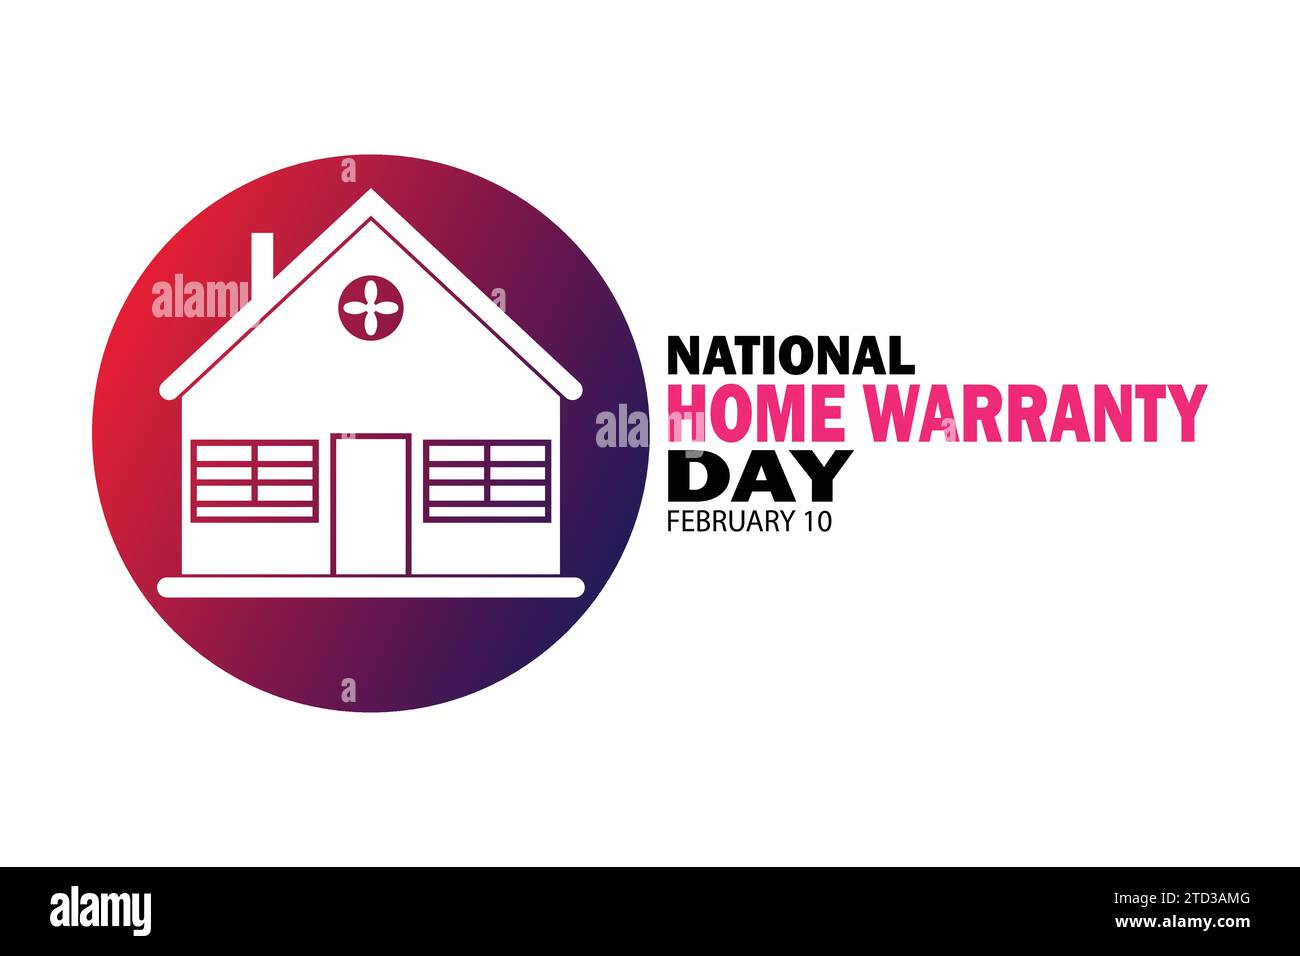 National Home Warranty Day Vector illustration. February 10. Holiday concept. Template for background, banner, card, poster with text inscription. Stock Vector